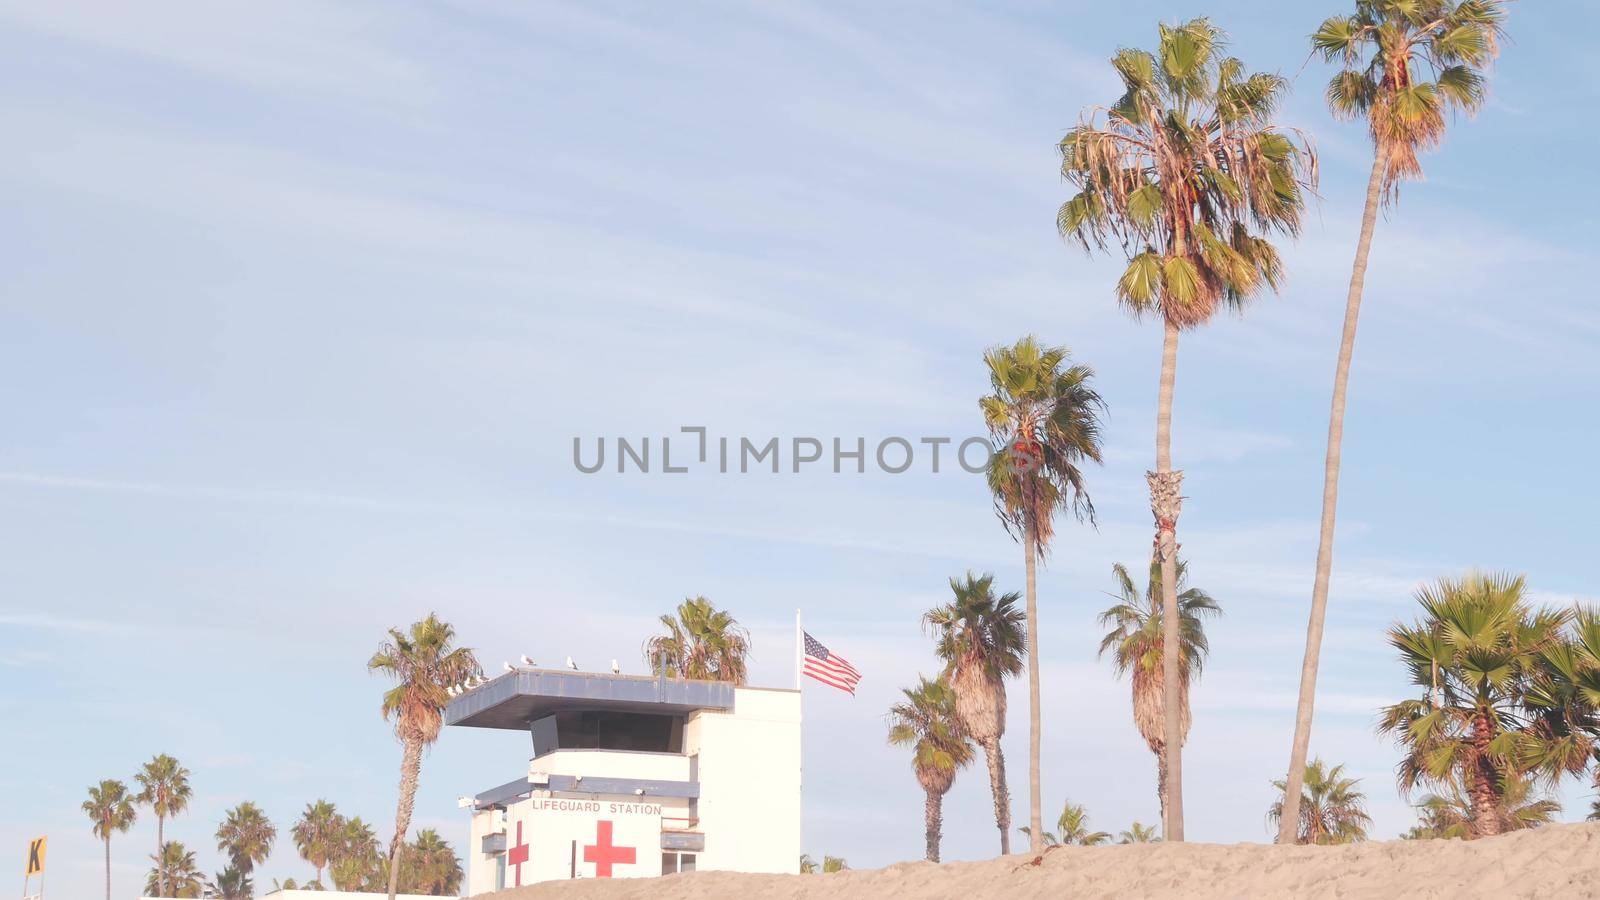 Lifeguard stand, life guard tower hut, surfing safety on California beach, USA. Summer pacific ocean aesthetic. Rescue station, coast lifesavers wachtower or house, palm trees, Ocean Beach, San Diego.